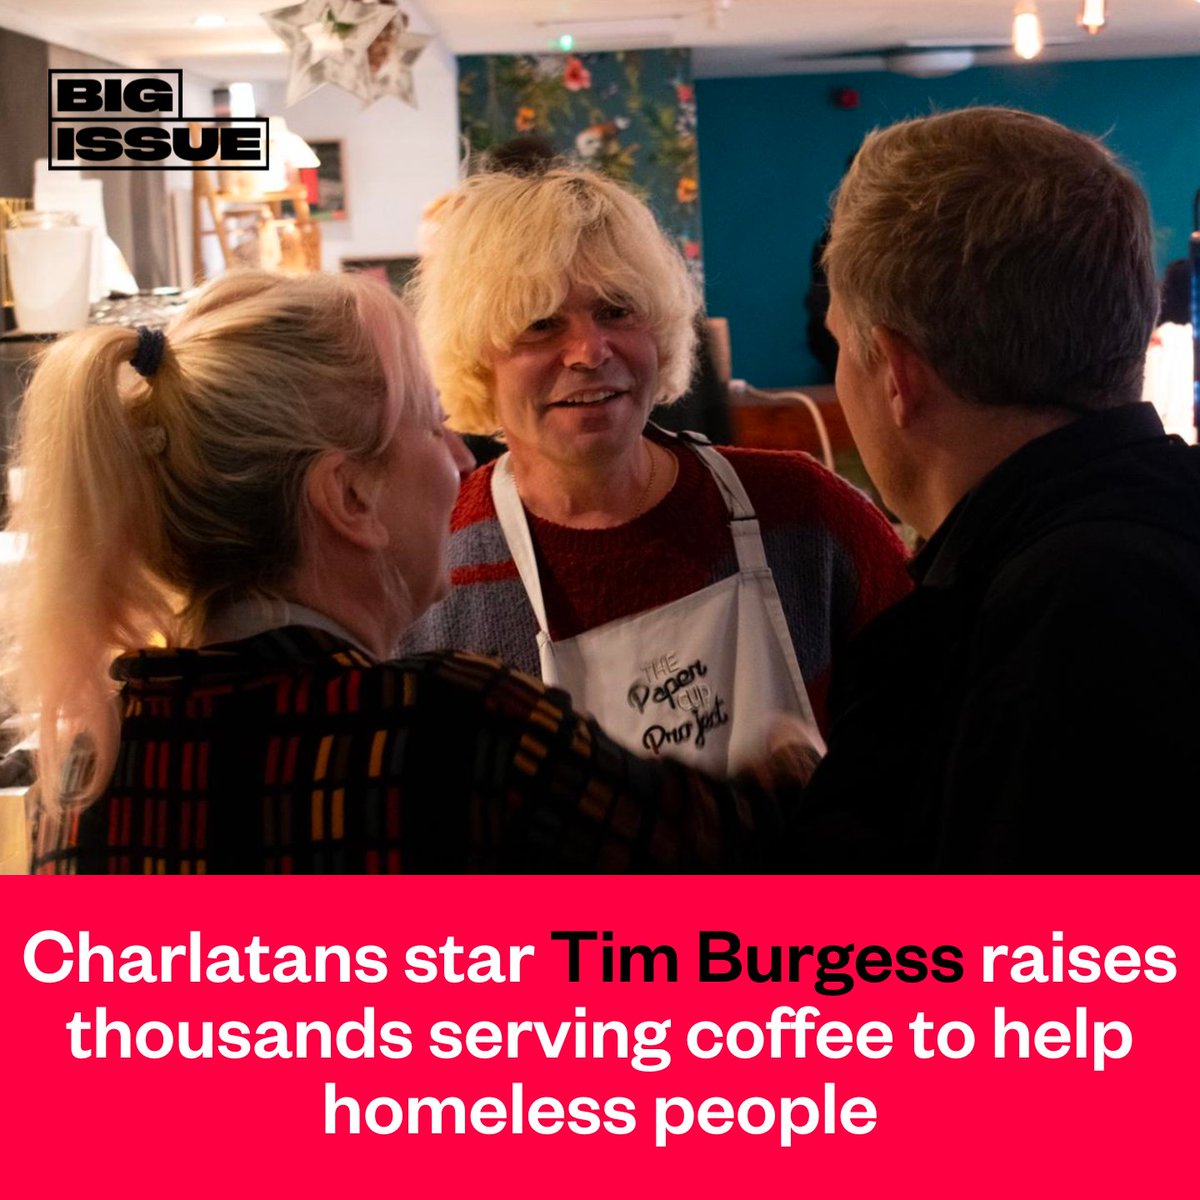 @Tim_Burgess's stint as a barista at Paper Cup Coffee in Liverpool saw more than £2,000 in donations flood in with 311 coffees paid forward for people experiencing homelessness ☕️ More here 👇 bigissue.com/news/housing/c…